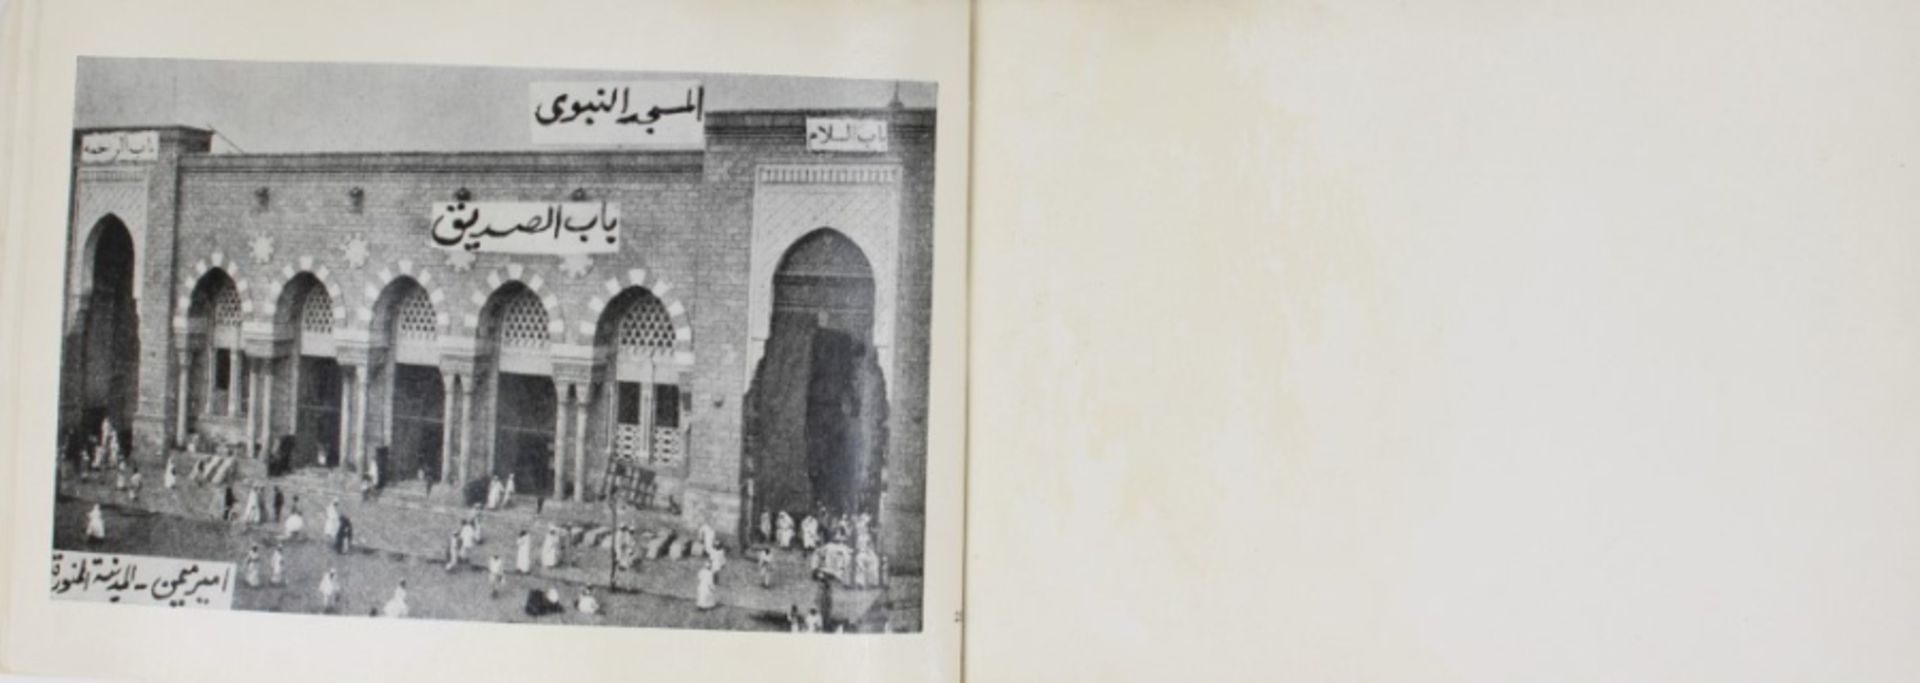 1930 Album with photographs of Mecca - Image 19 of 24